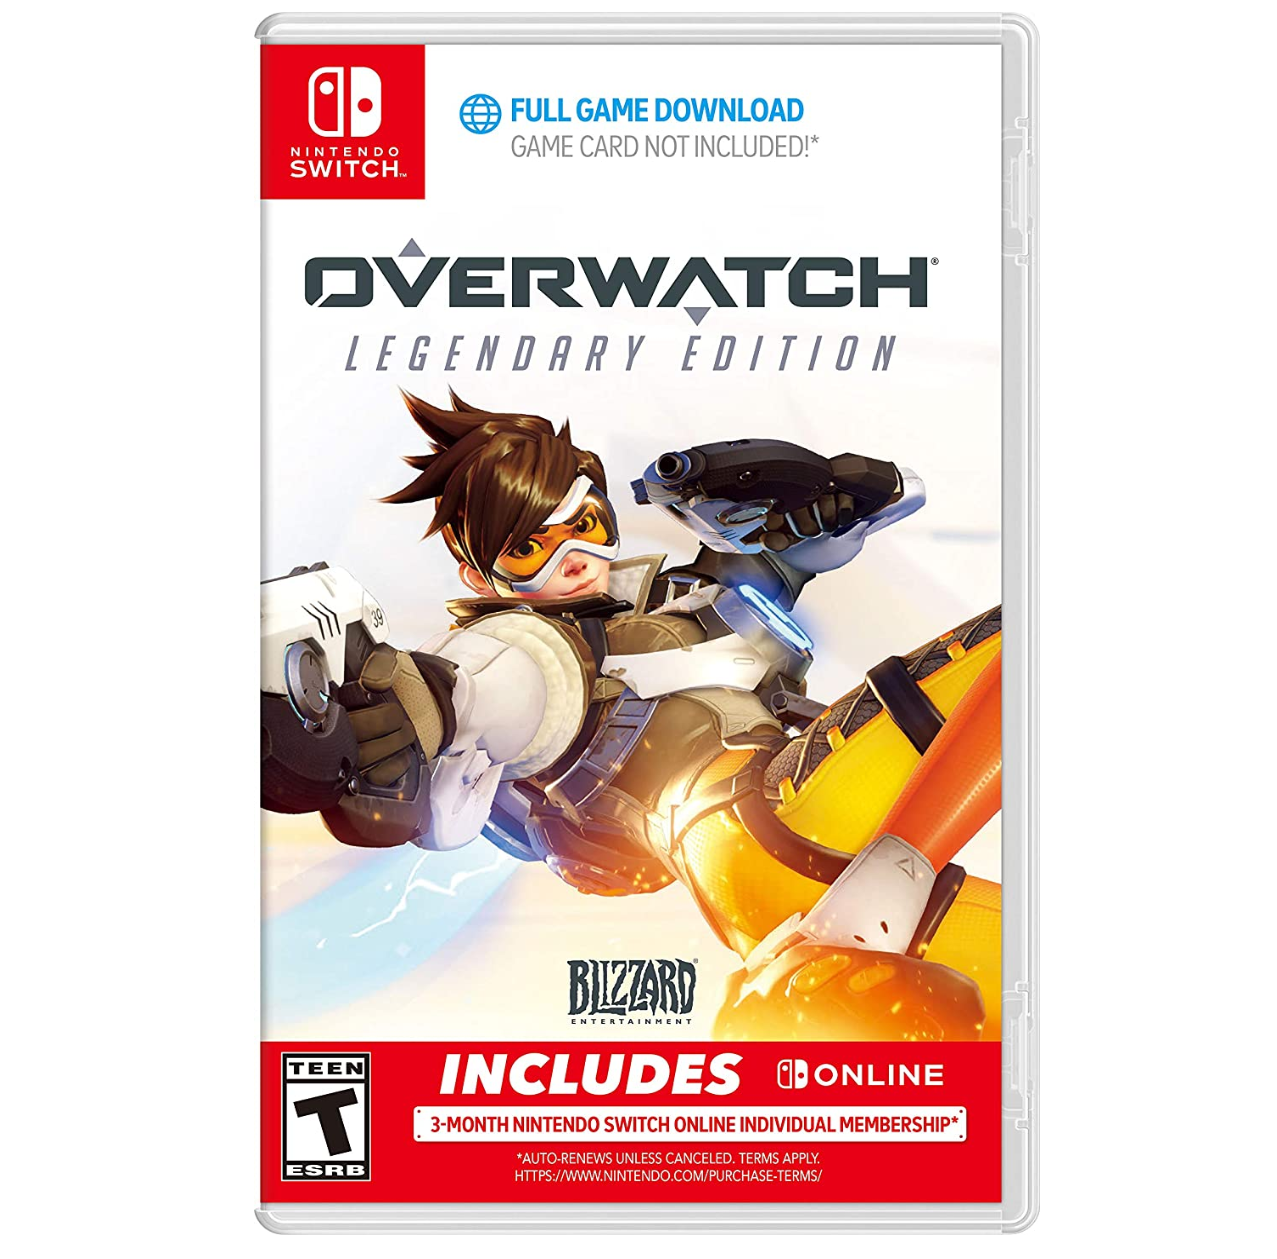 switch-version-watch-pioneer-game-is-only-2999-a-good-time-to-get-started-2019-6-2-2020-6-2